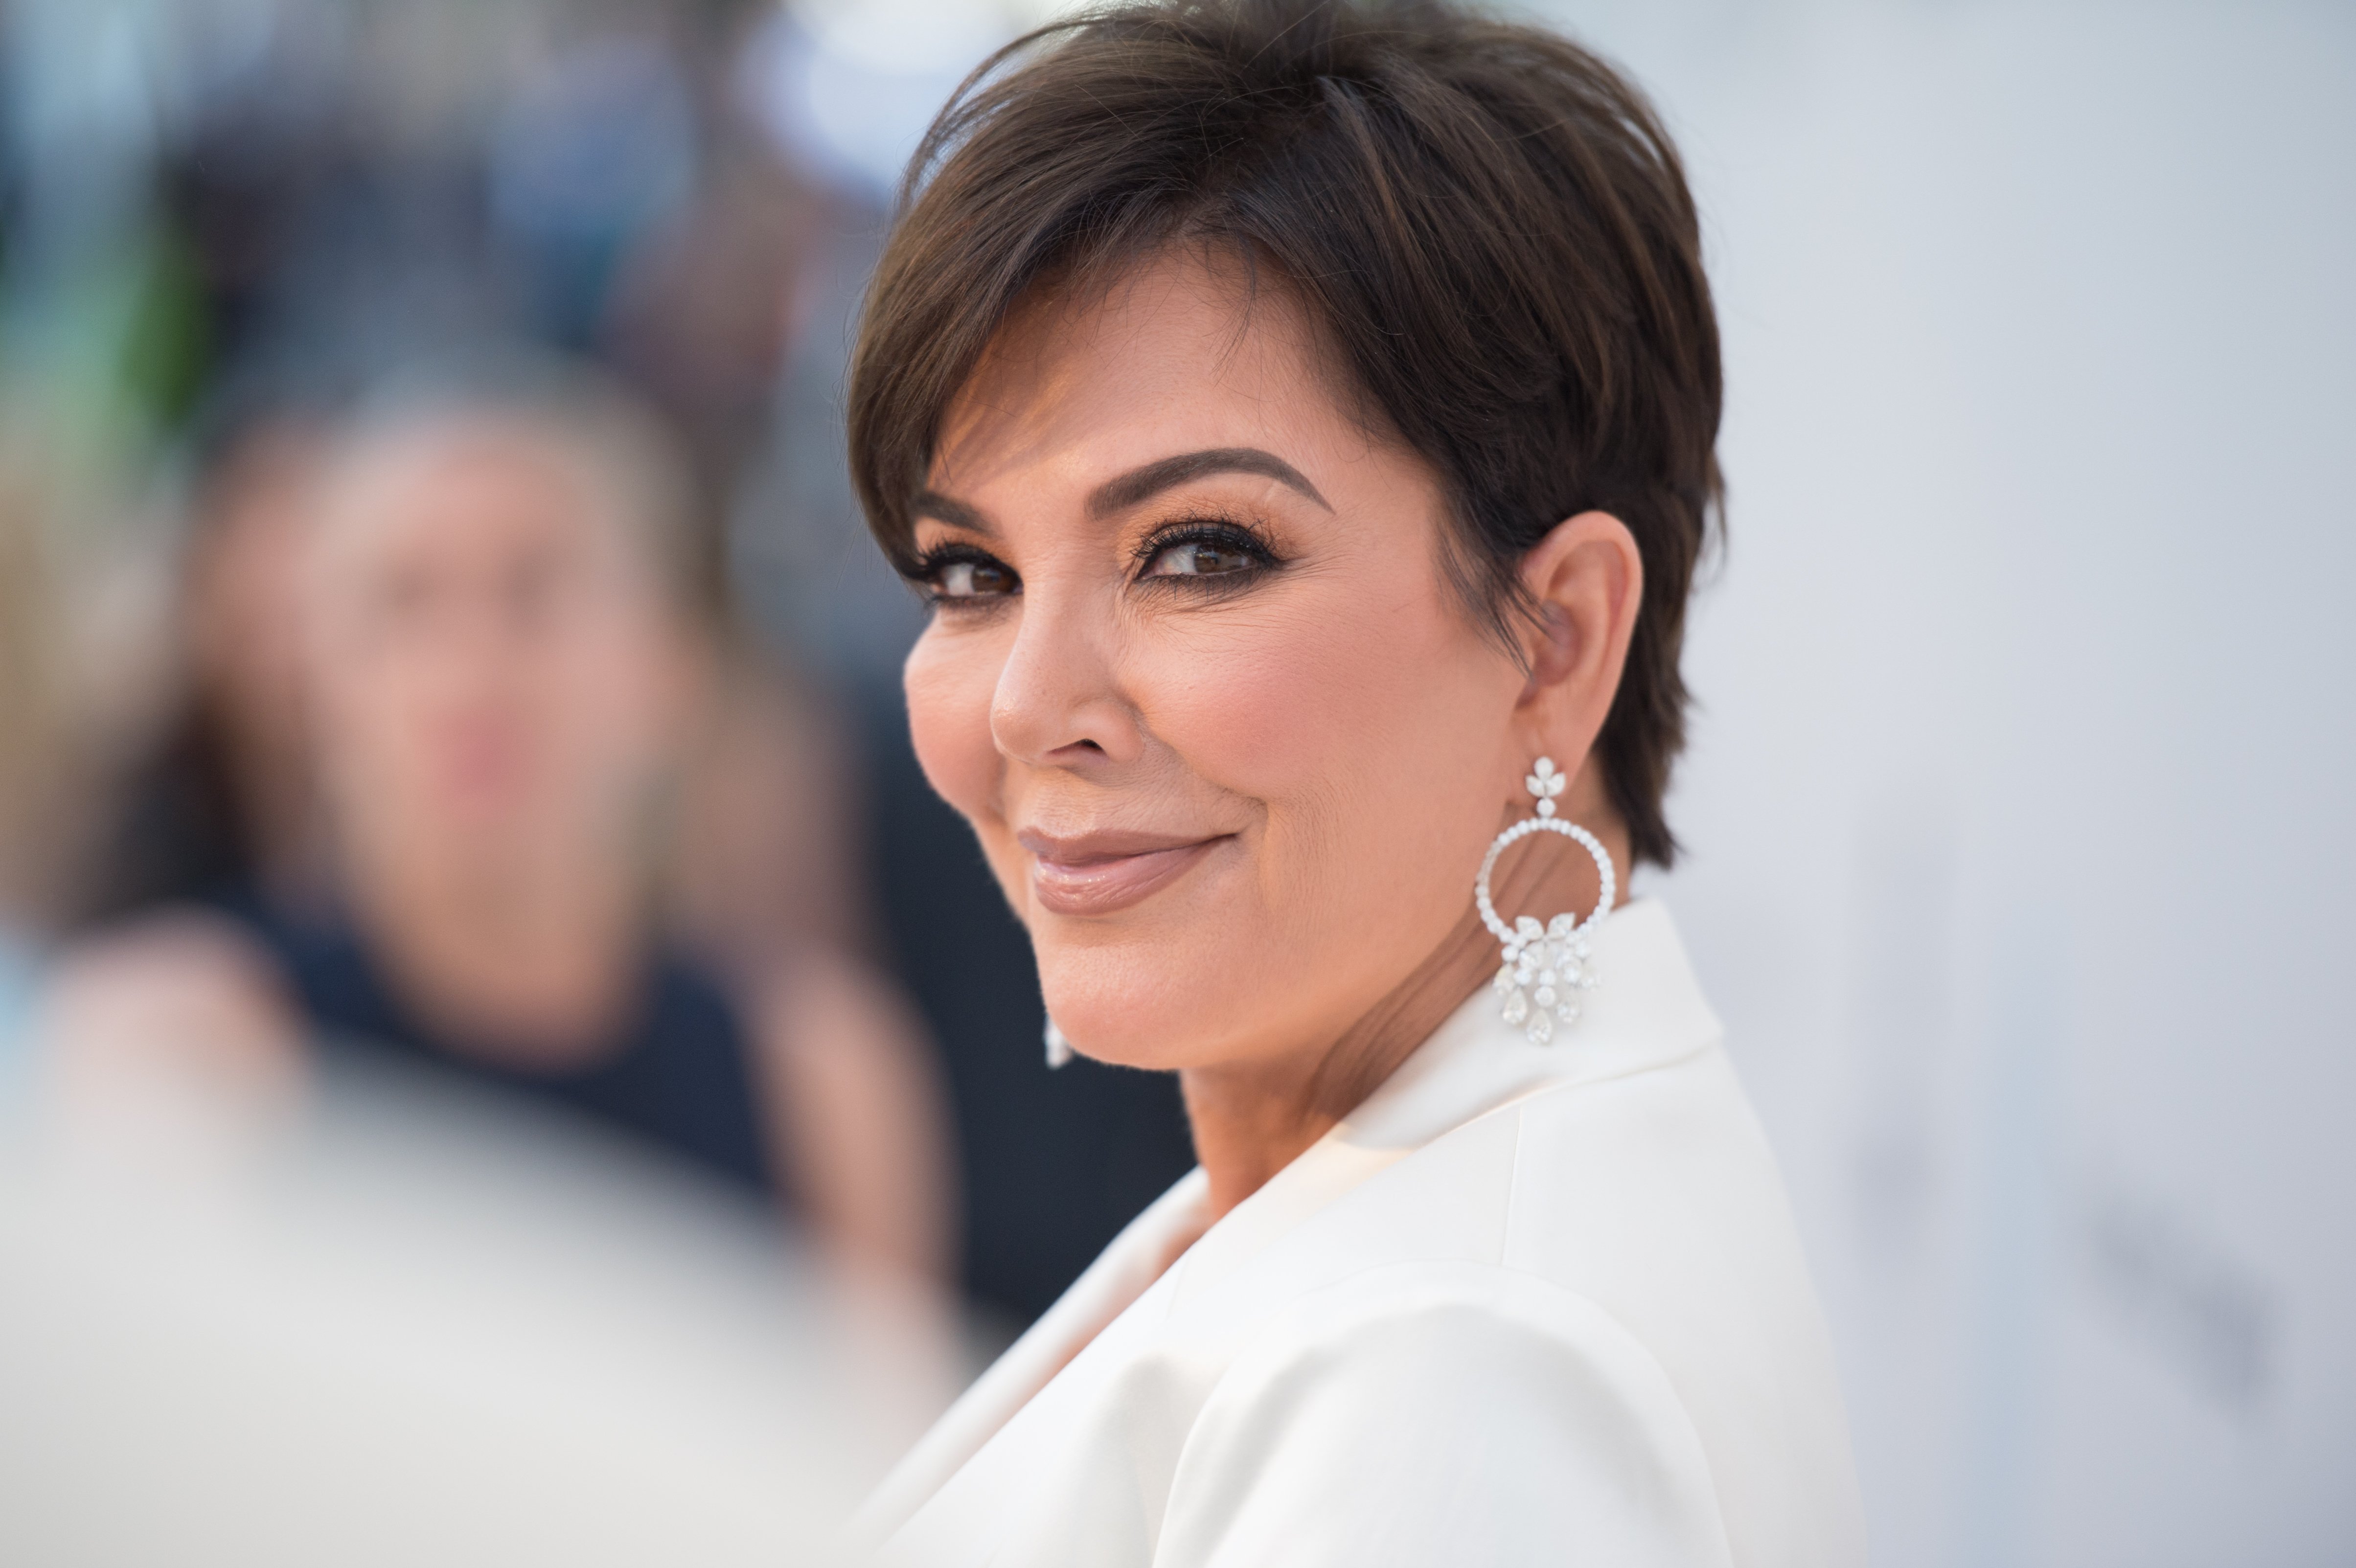 Kris Jenner at the amfAR Cannes Gala in May 2019. | Photo: Getty Images